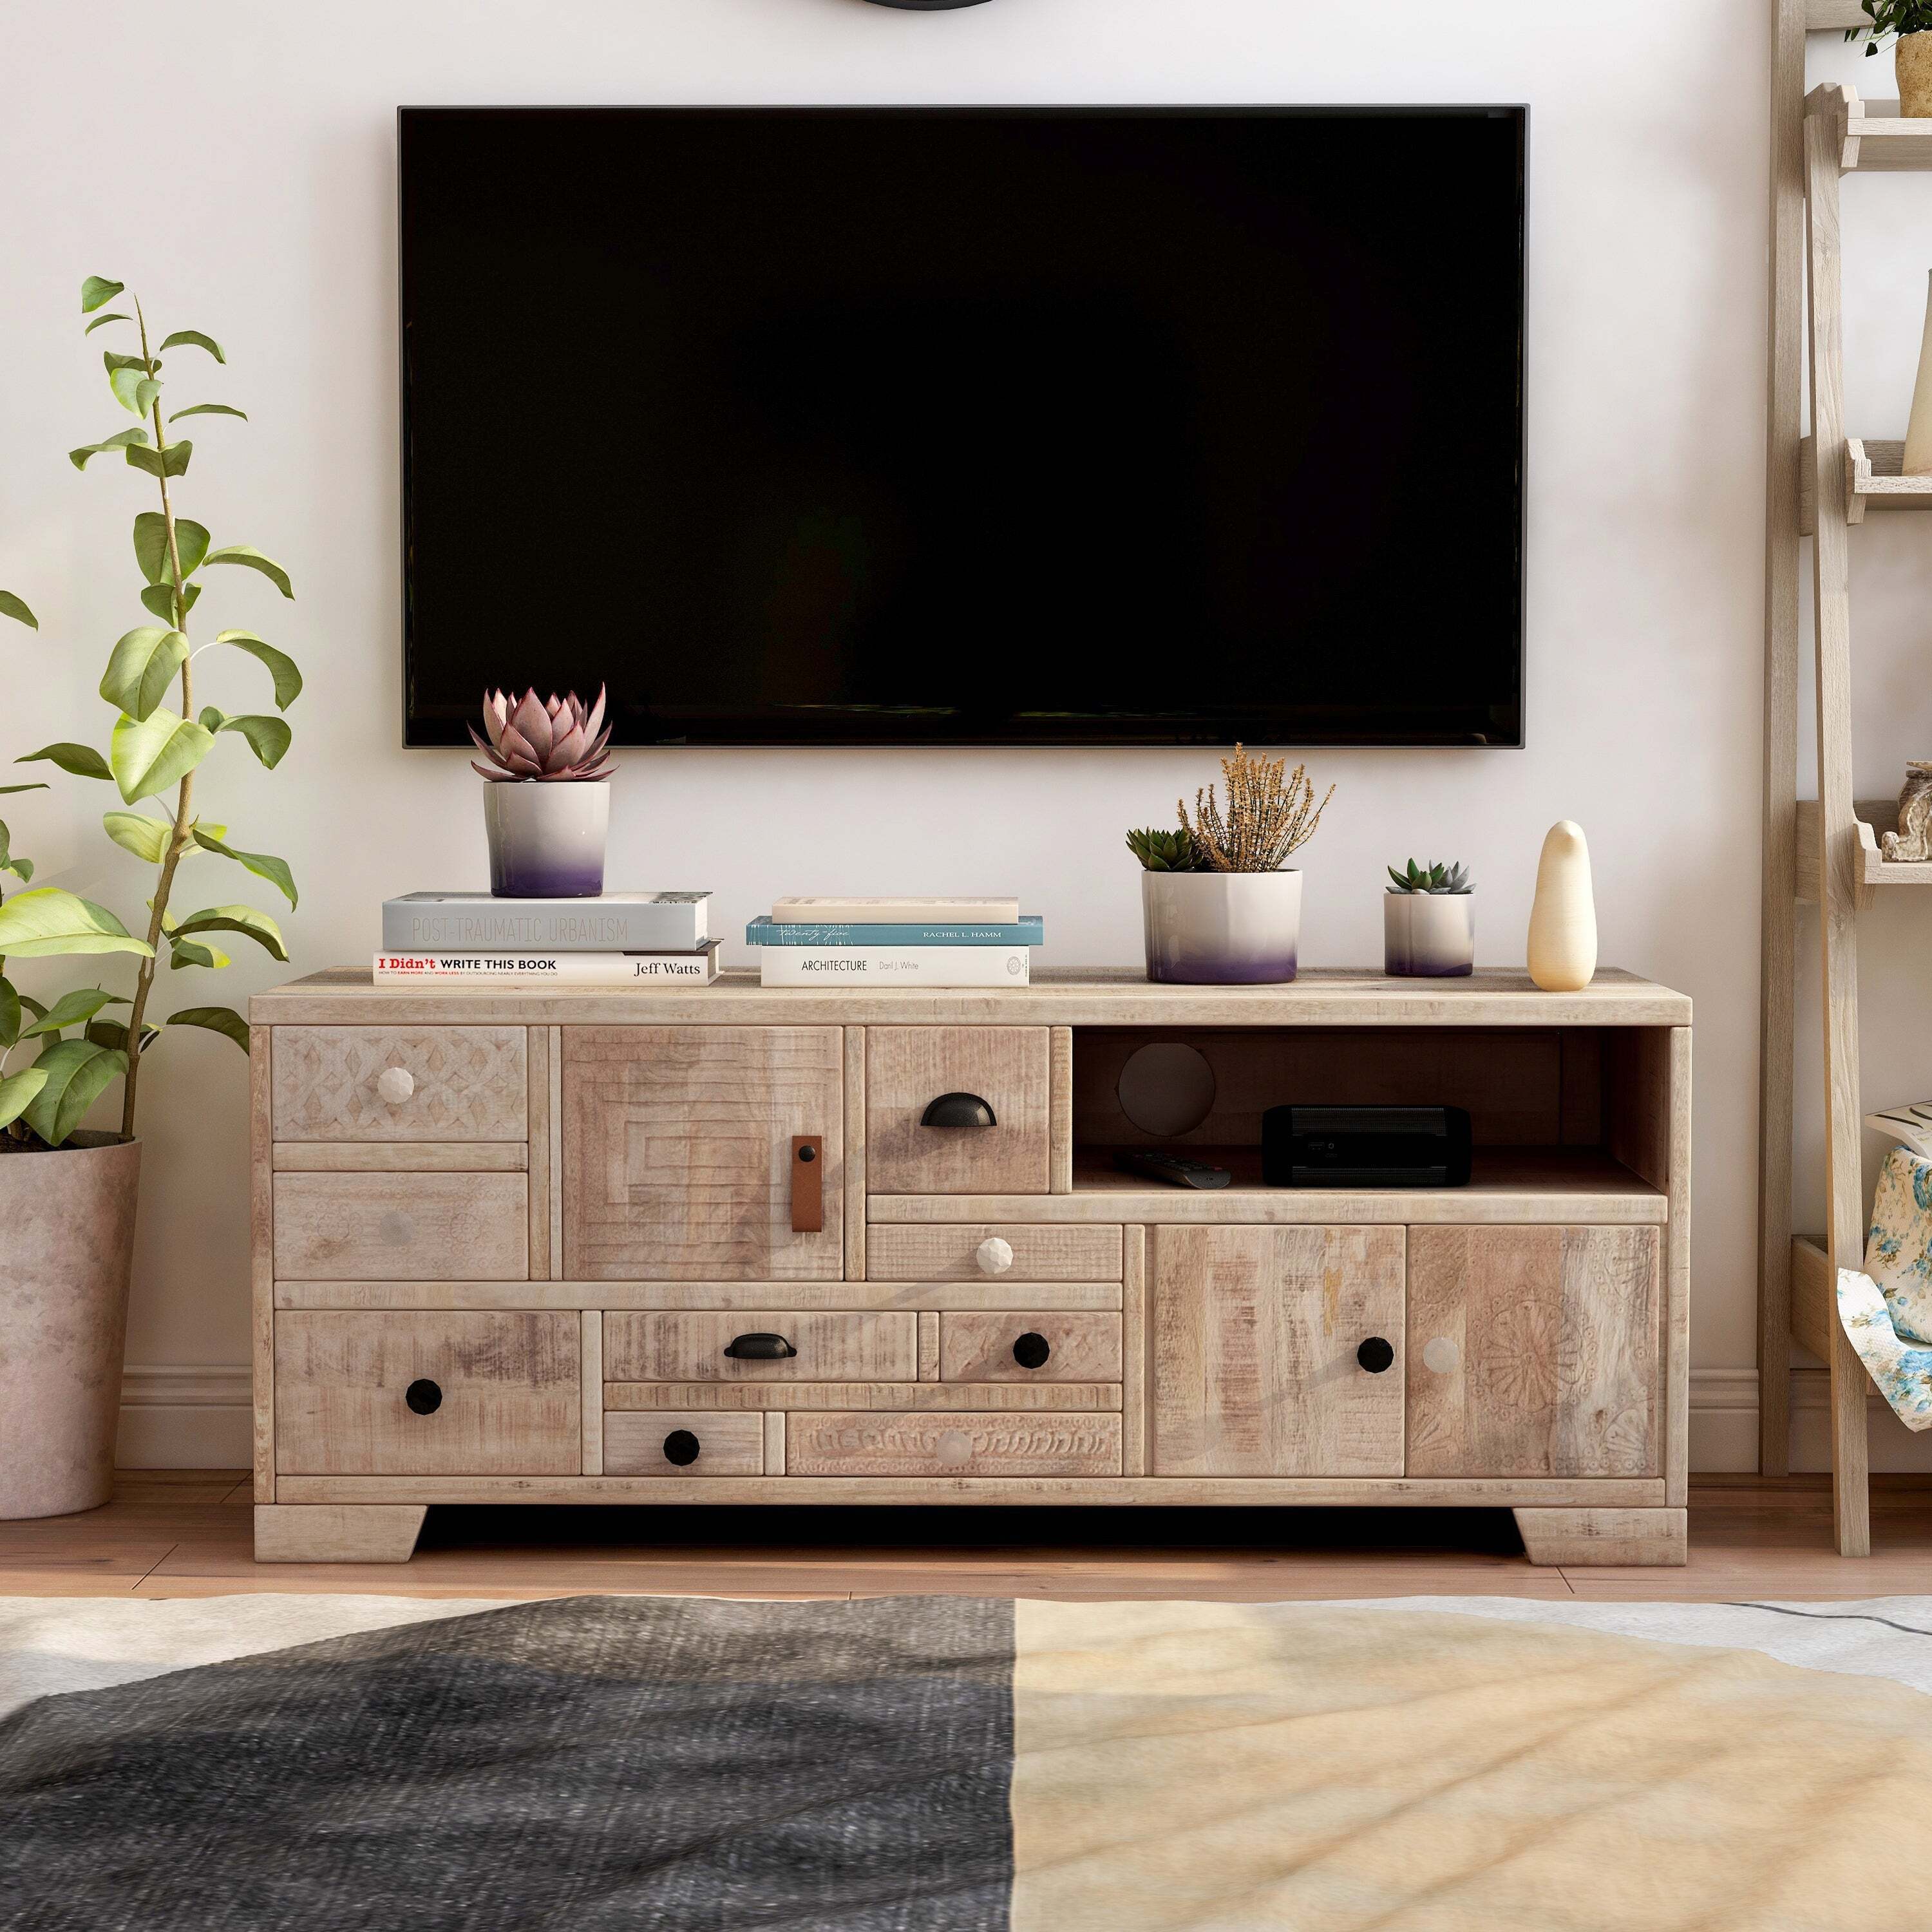 TV cabinet with statement drawers